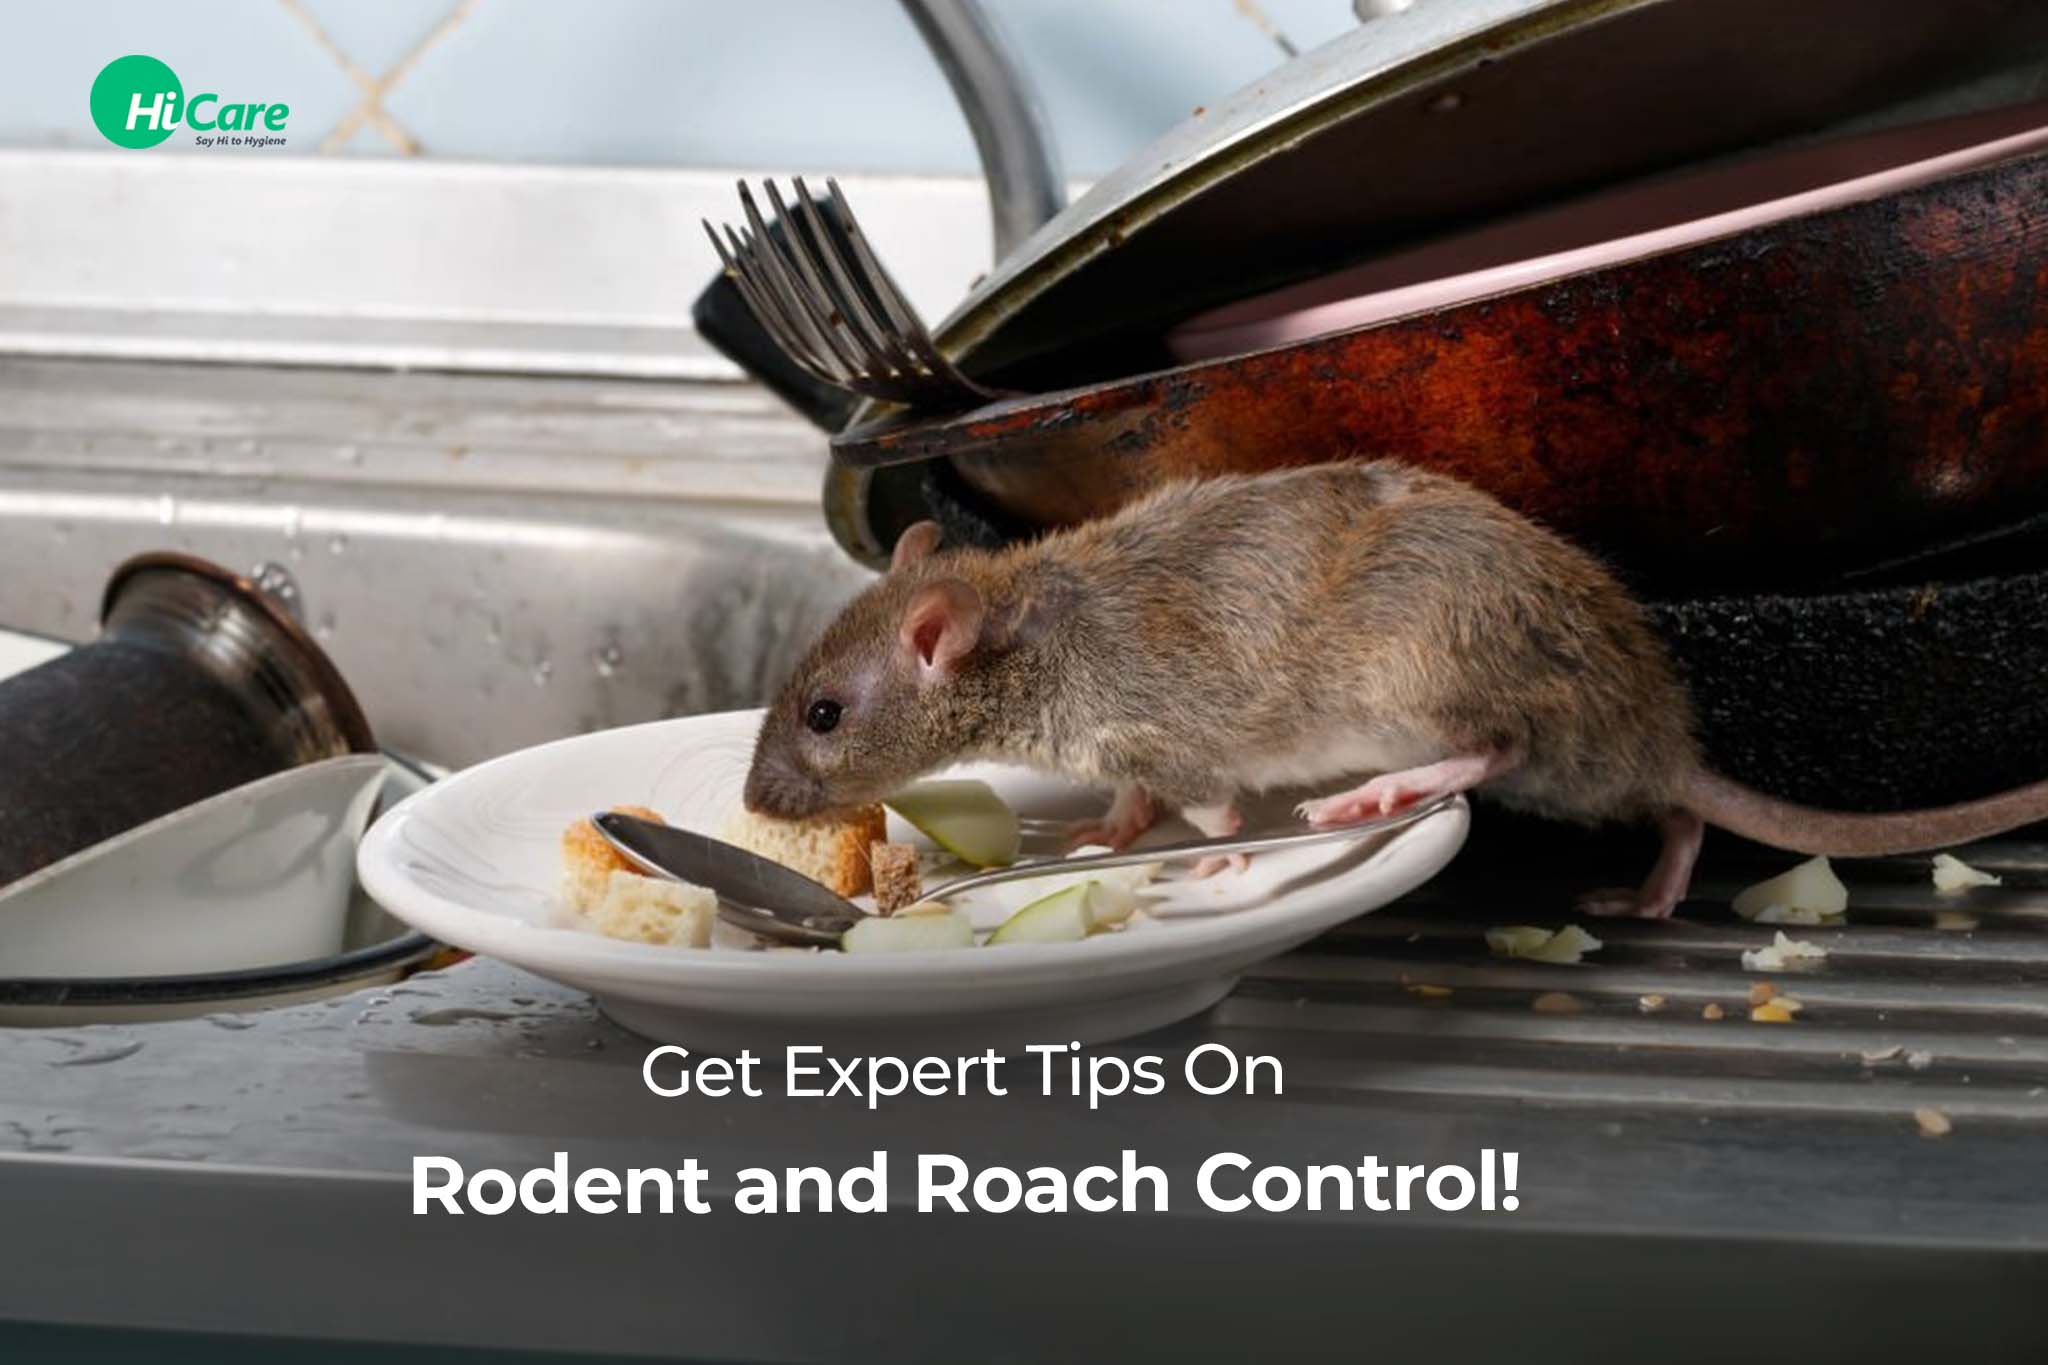 https://hicare.in/blog/wp-content/uploads/2023/01/Get-Expert-Tips-On-Rodent-and-Roach-Control-2048.1365.jpg